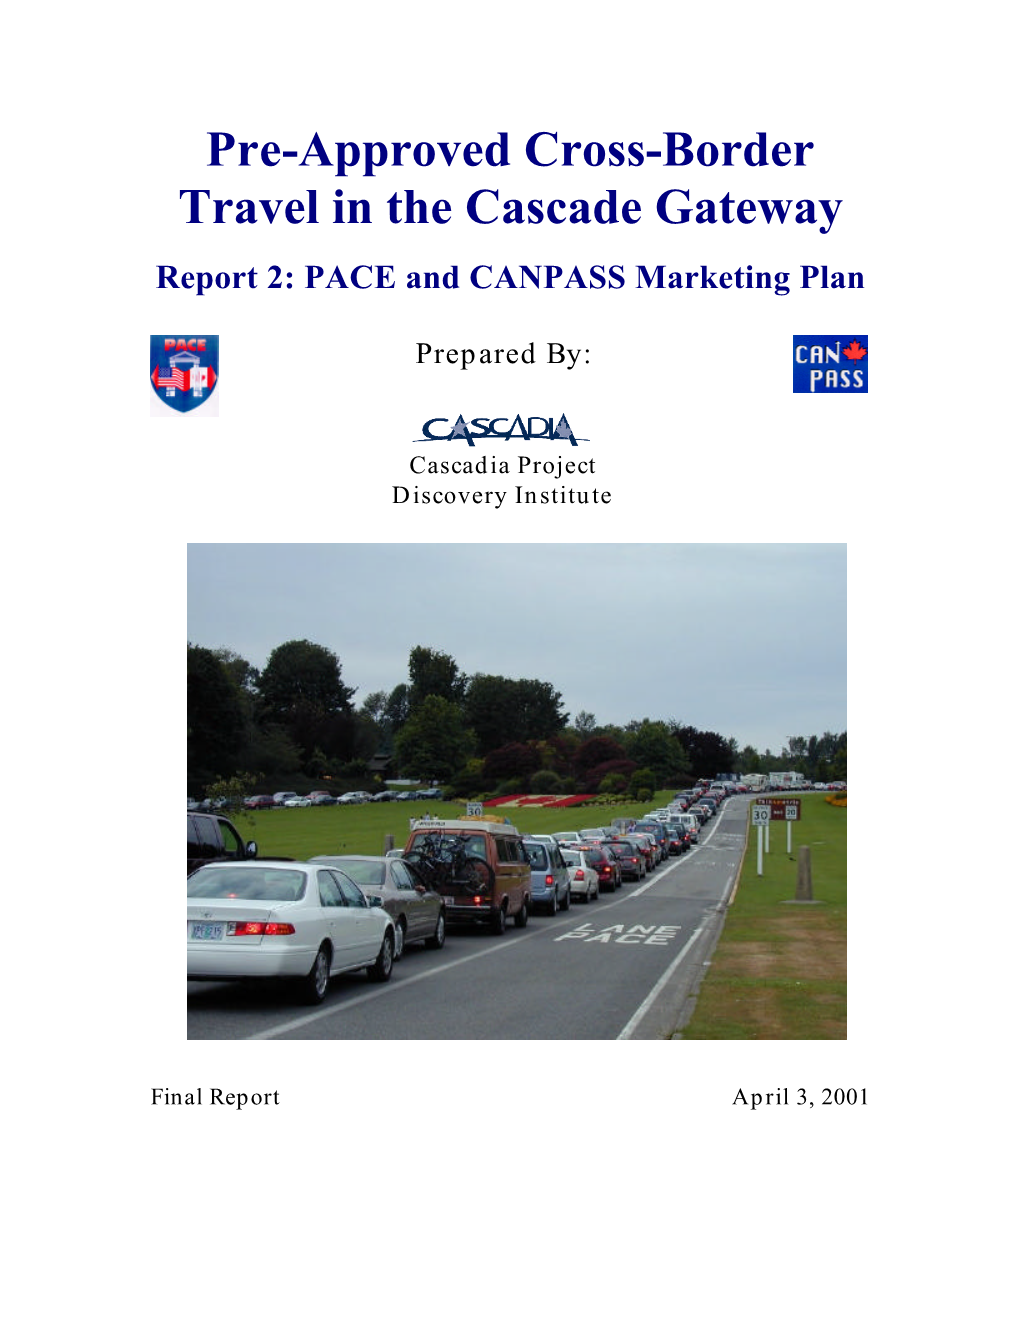 2001 Pre-Approved Cross-Border Travel in the Cascade Gateway